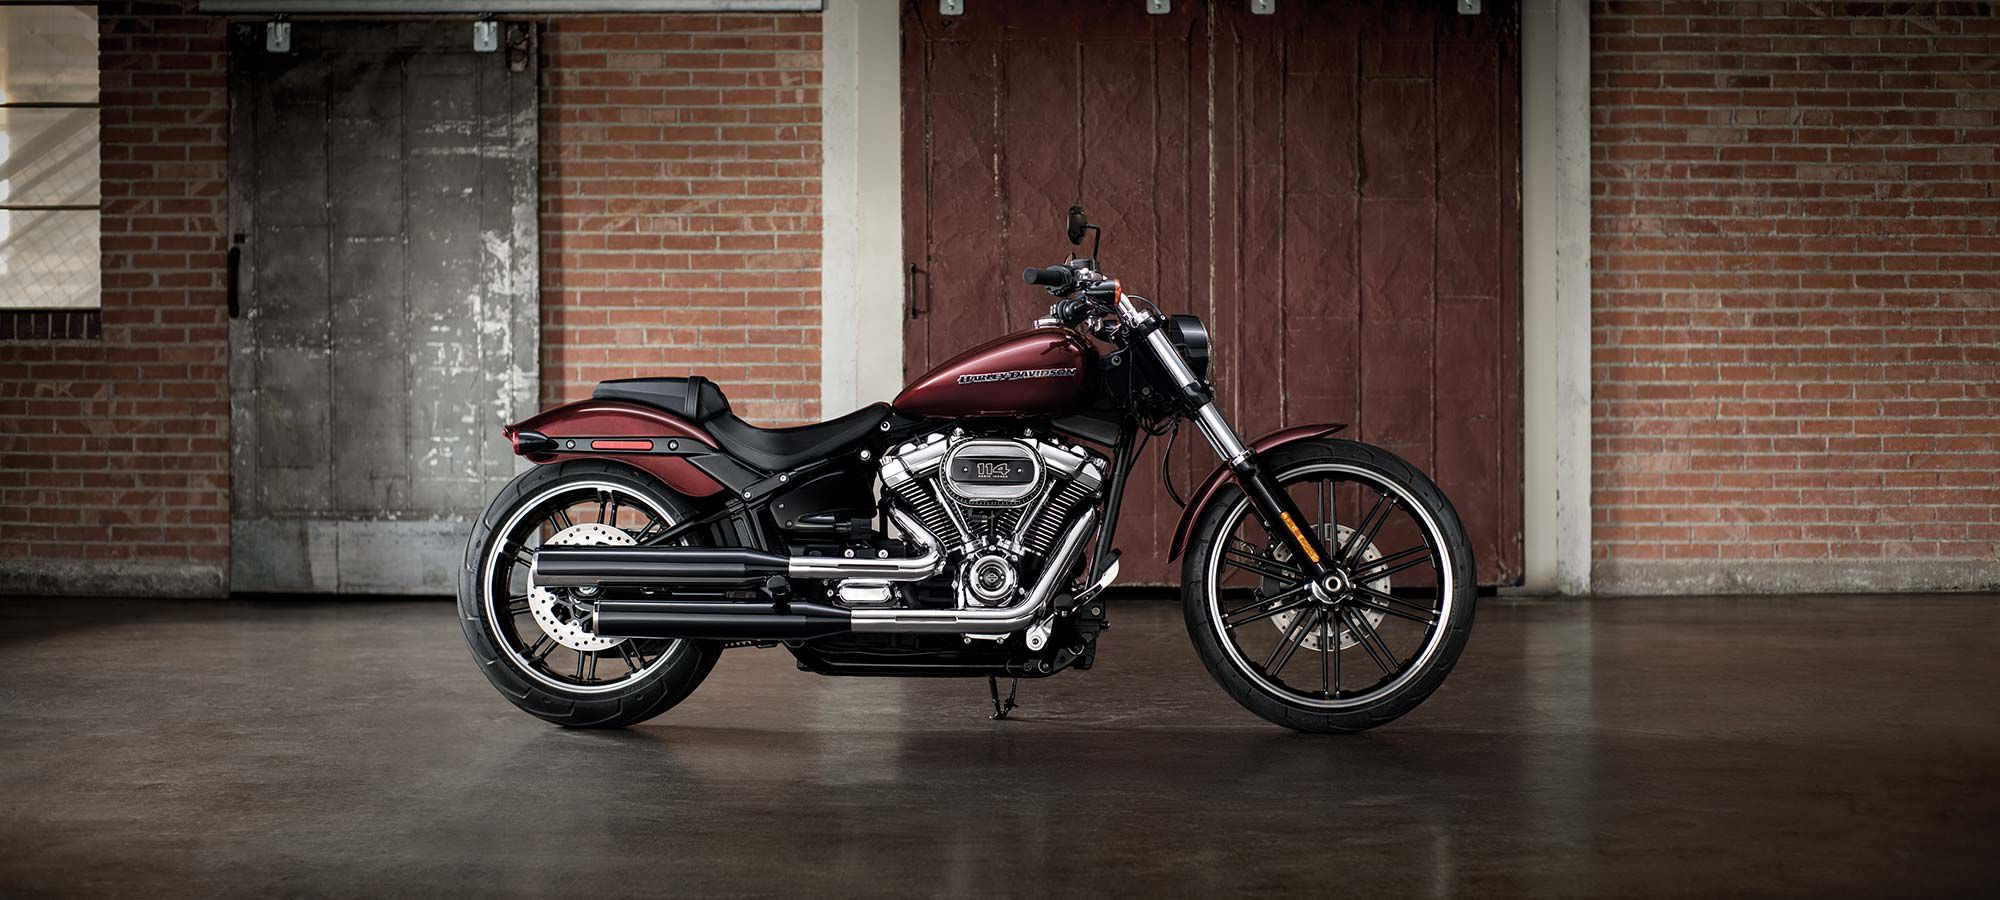 This Is The New 2018 Harley Davidson Softail Breakout 114 Cycle World